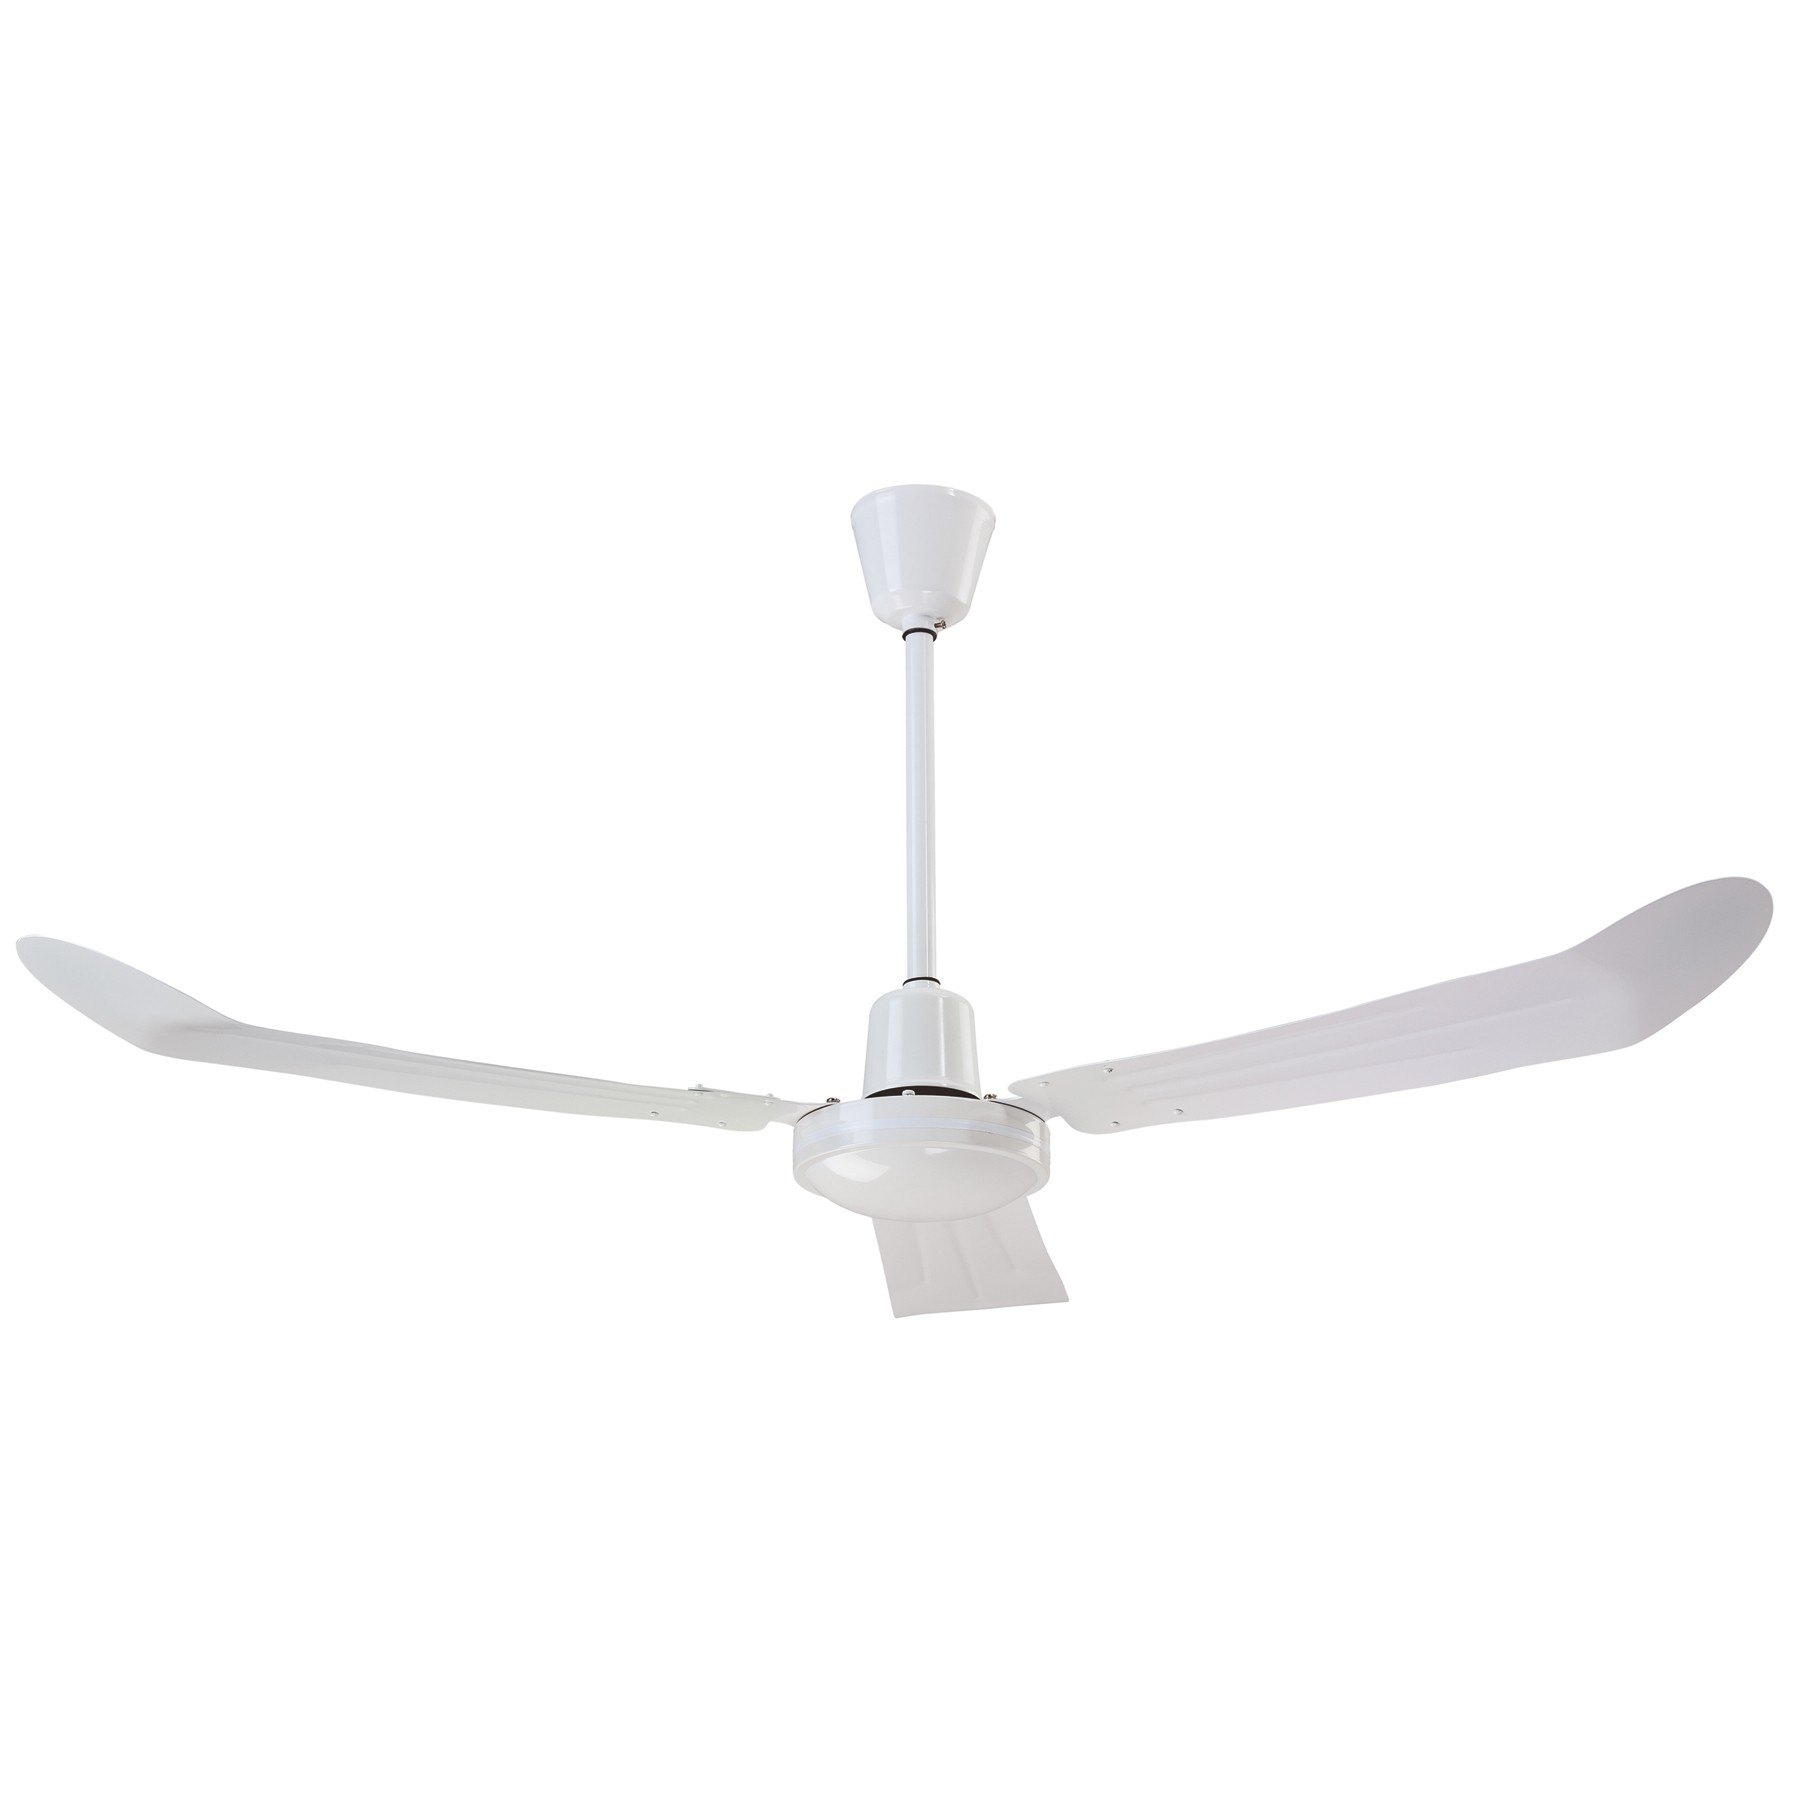 agricultural ceiling fans photo - 3